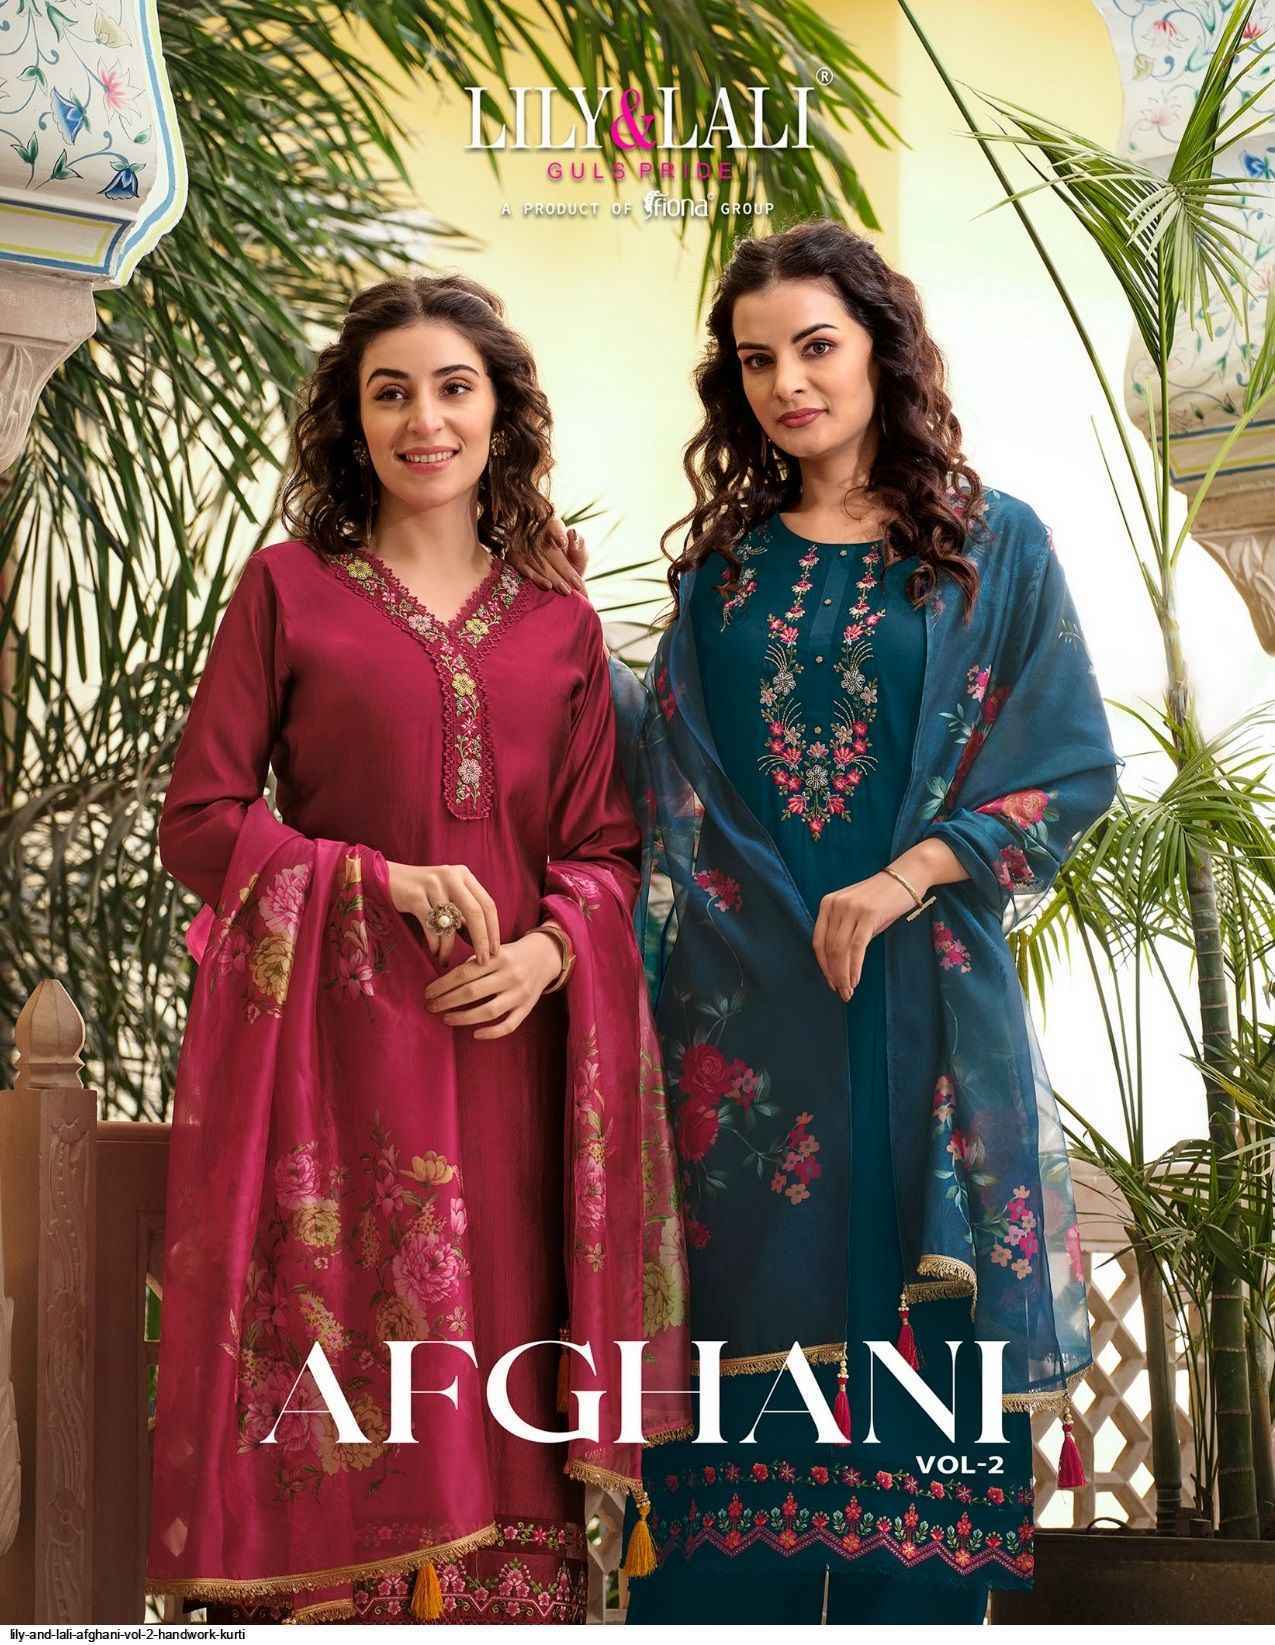 Lily And Lali Afghani Vol-2 Readymade Suit 6 Pc Catalog